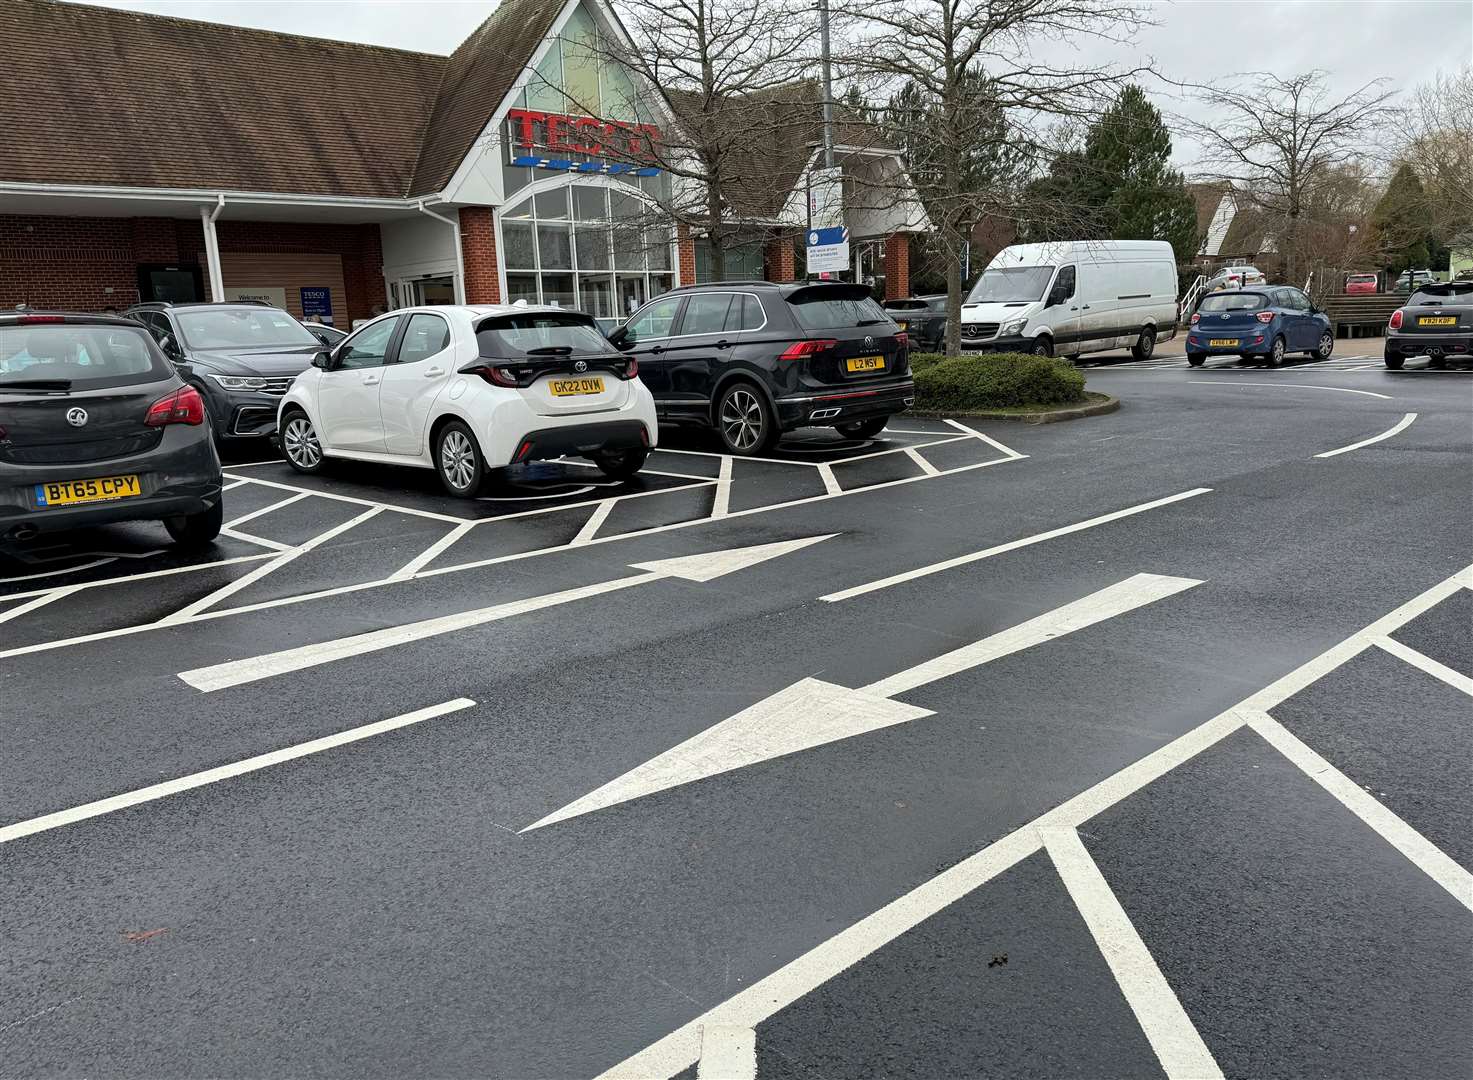 The refurbishment has improved the road surface and markings for Tesco shoppers. Picture: Sue Ferguson/My Tenterden